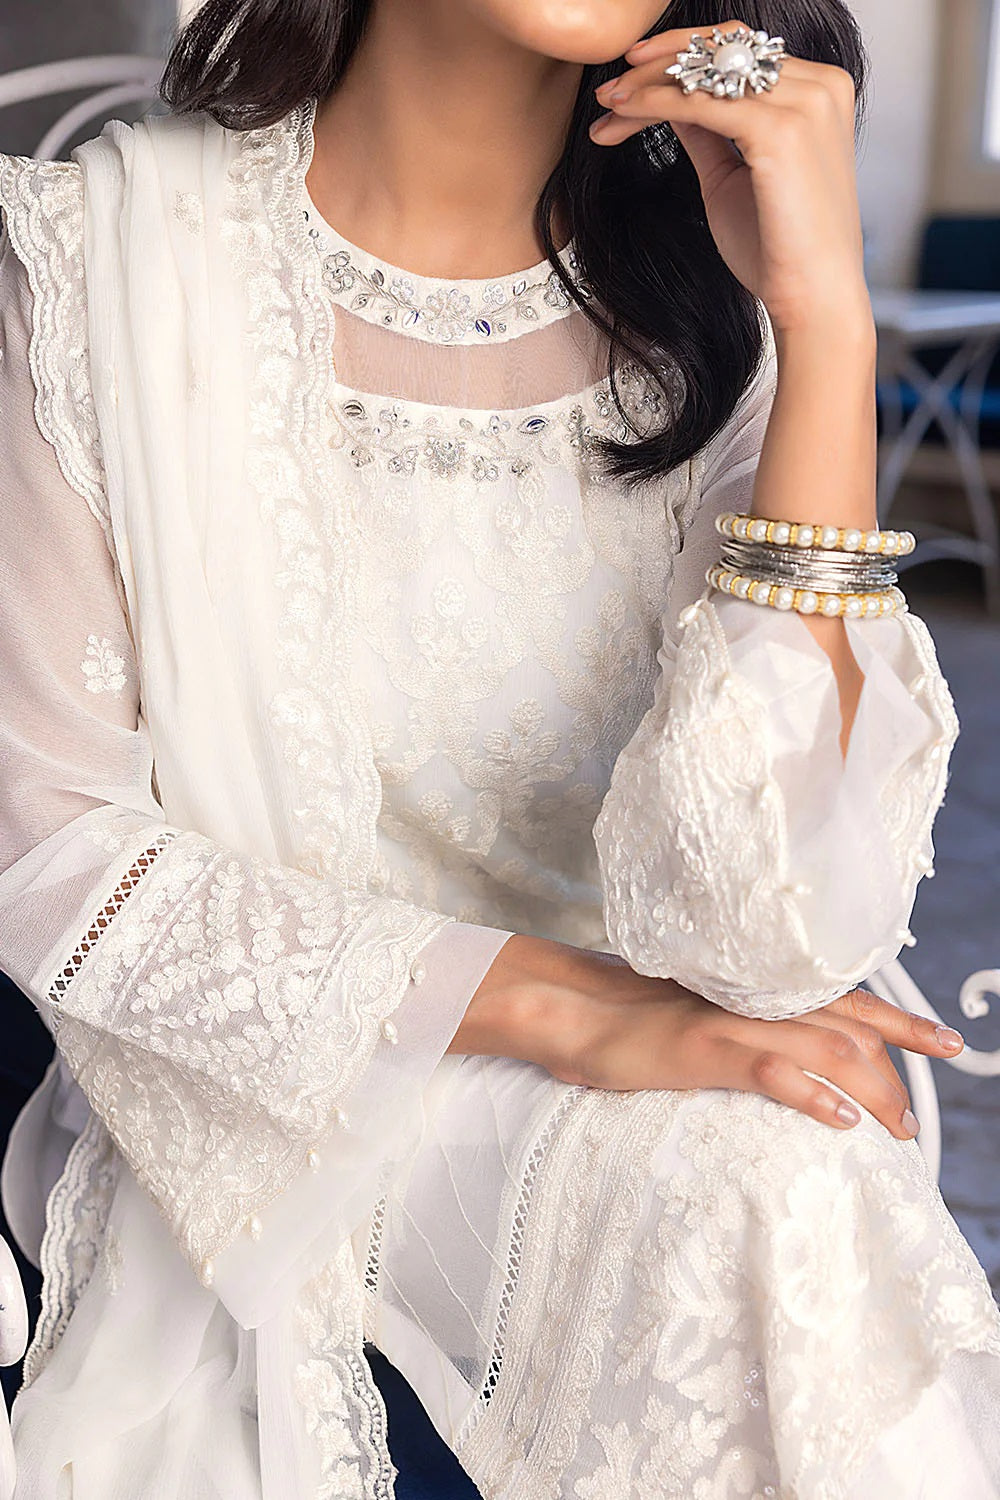 Ensembles By Azure Embroidered Chiffon Suits Unstitched 4 Piece AZES - 98 Milky Moon